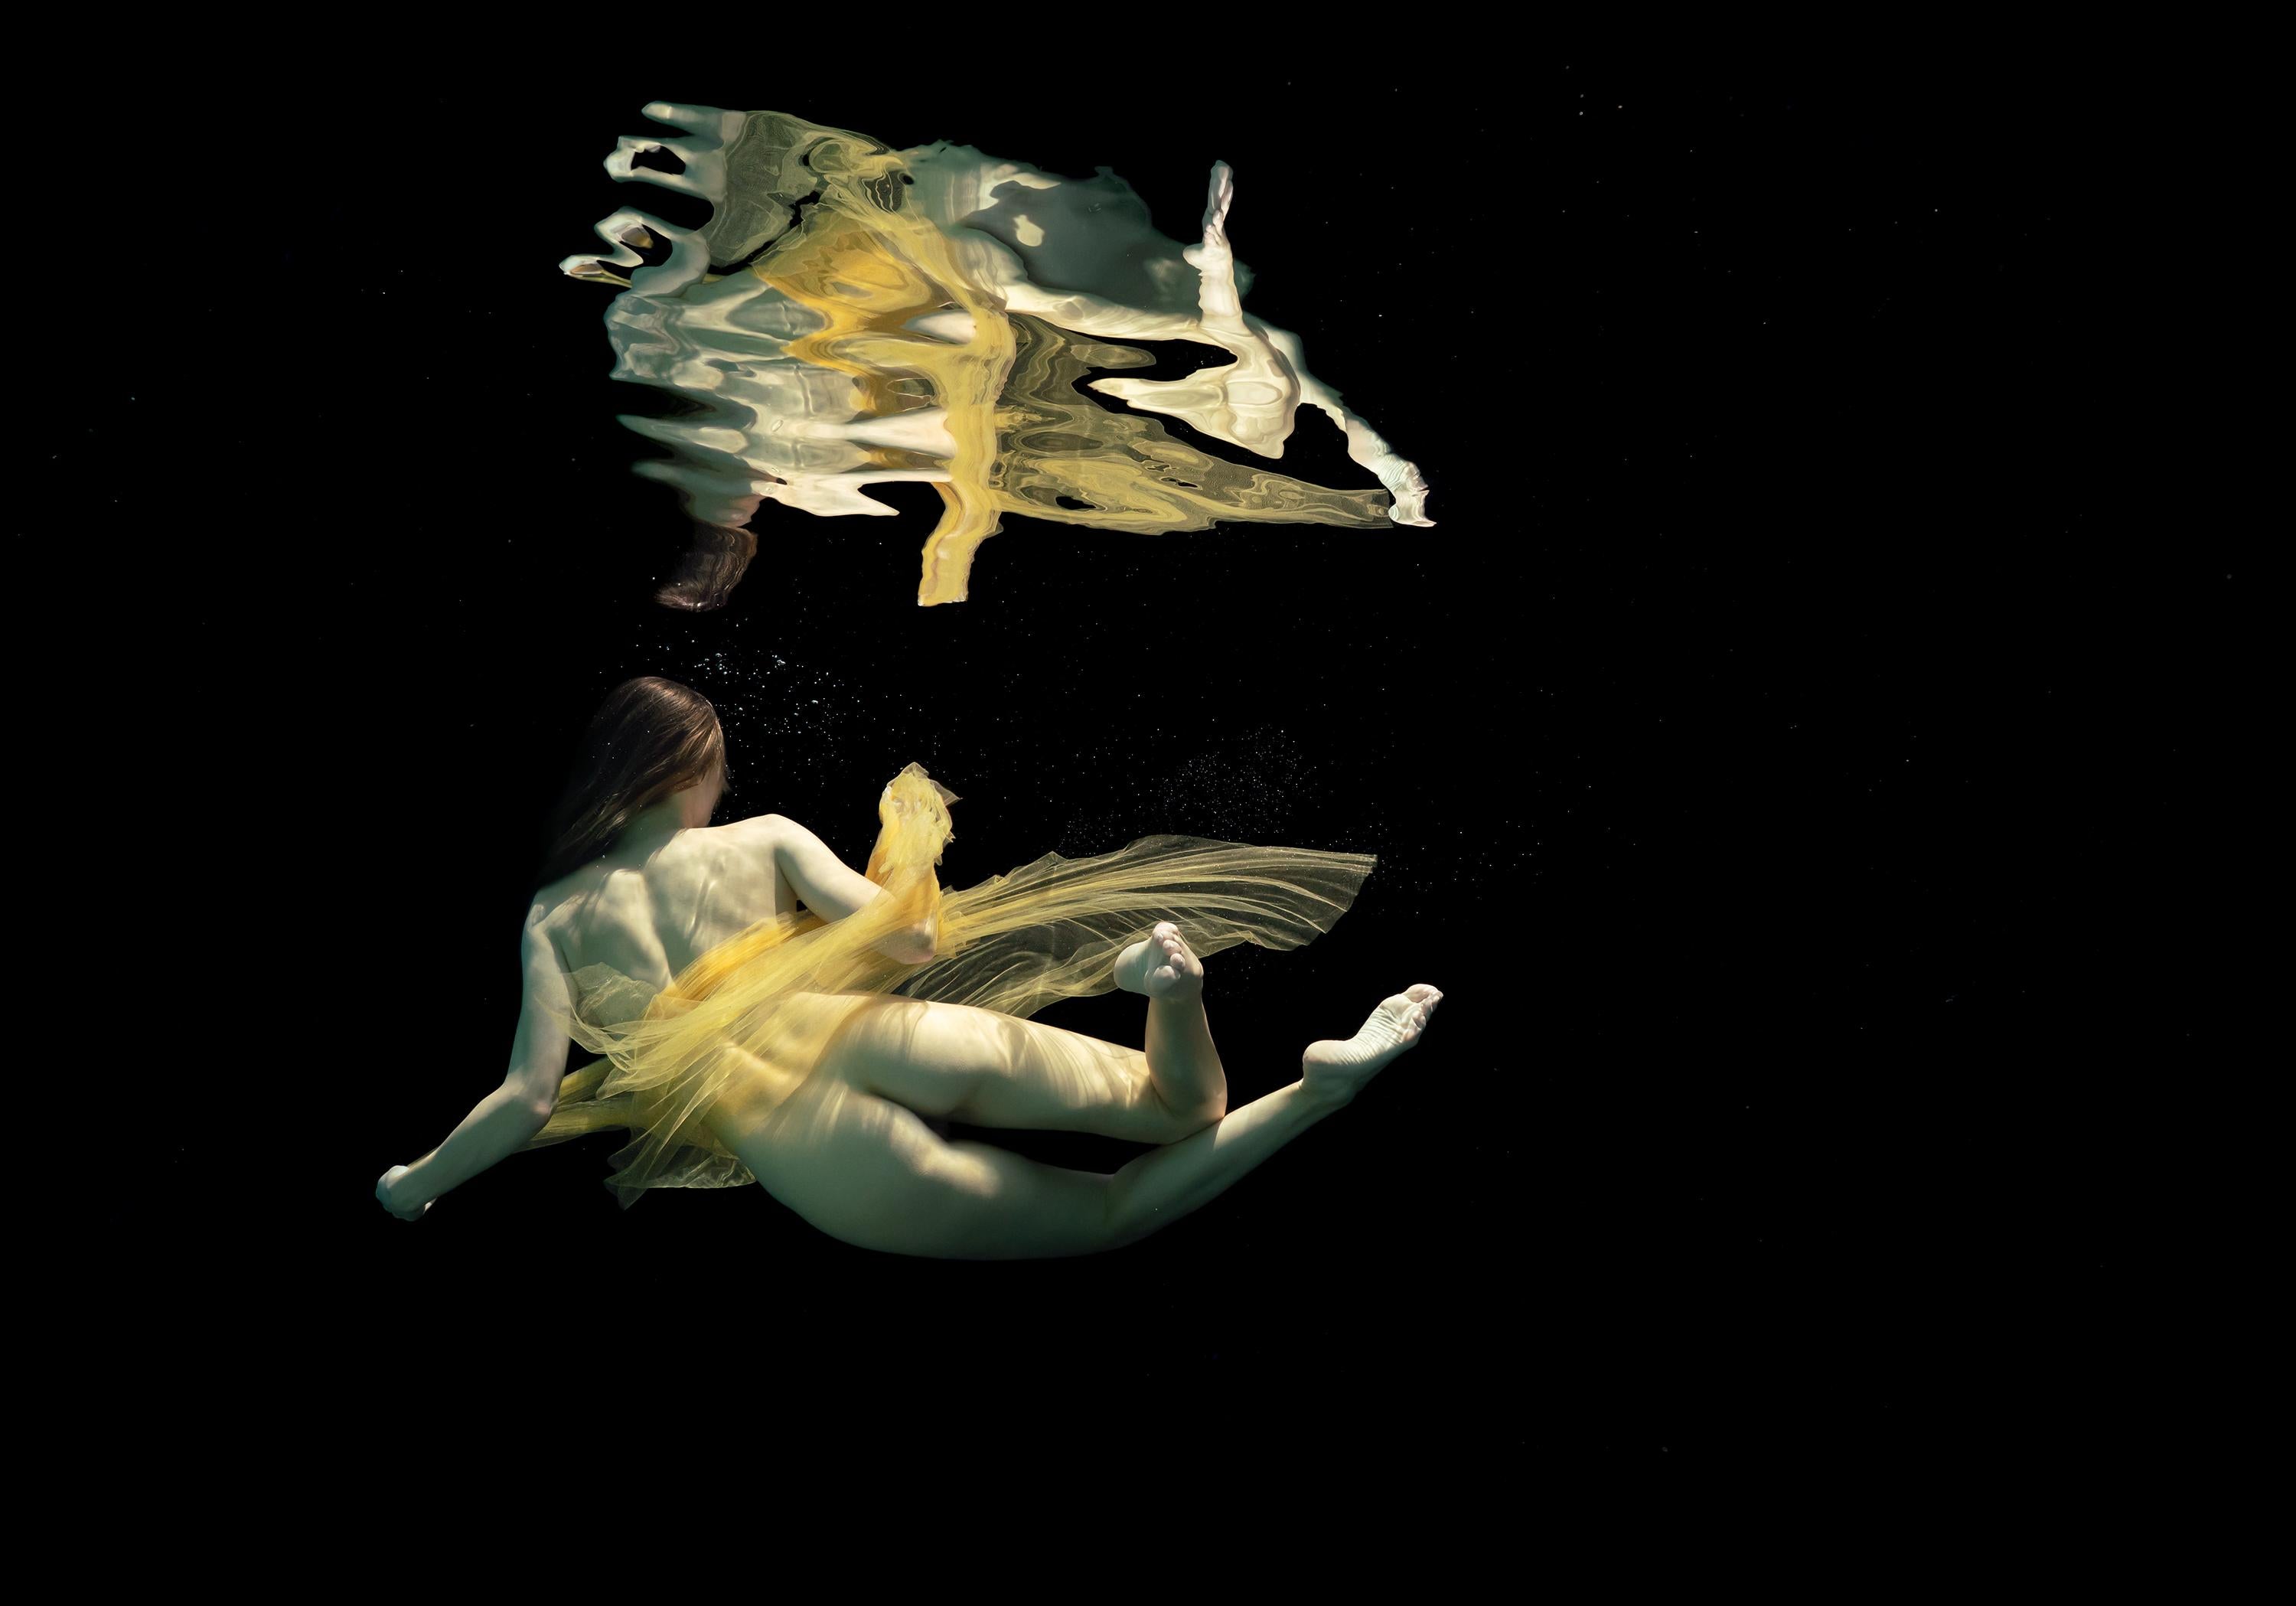 Alex Sher Color Photograph - Song of Songs - underwater nude photograph - archival pigment print 24" x 35"